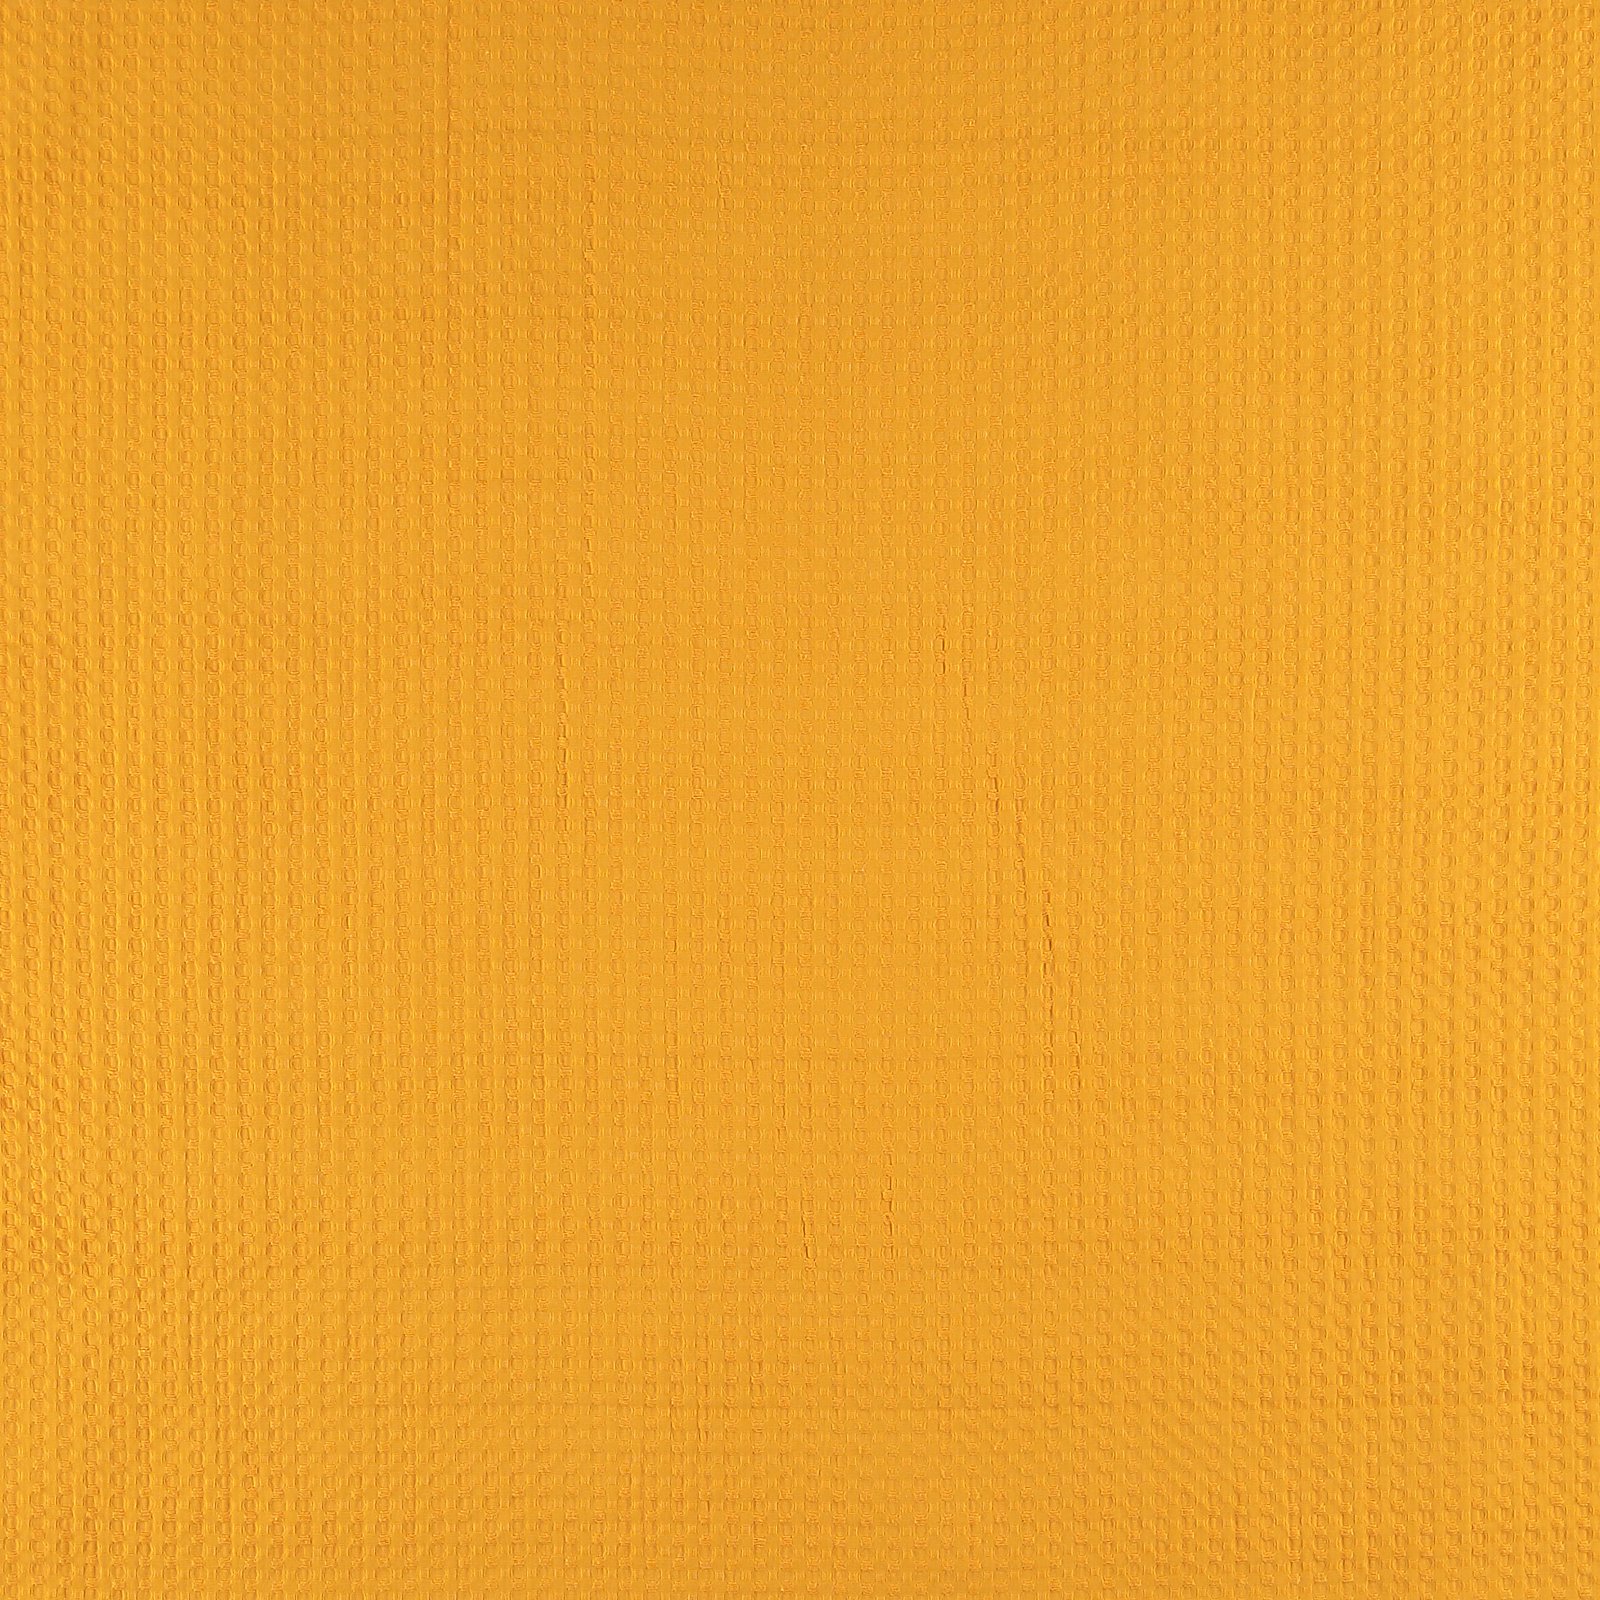 Woven jacquard orange yellow w structure 501919_pack_solid